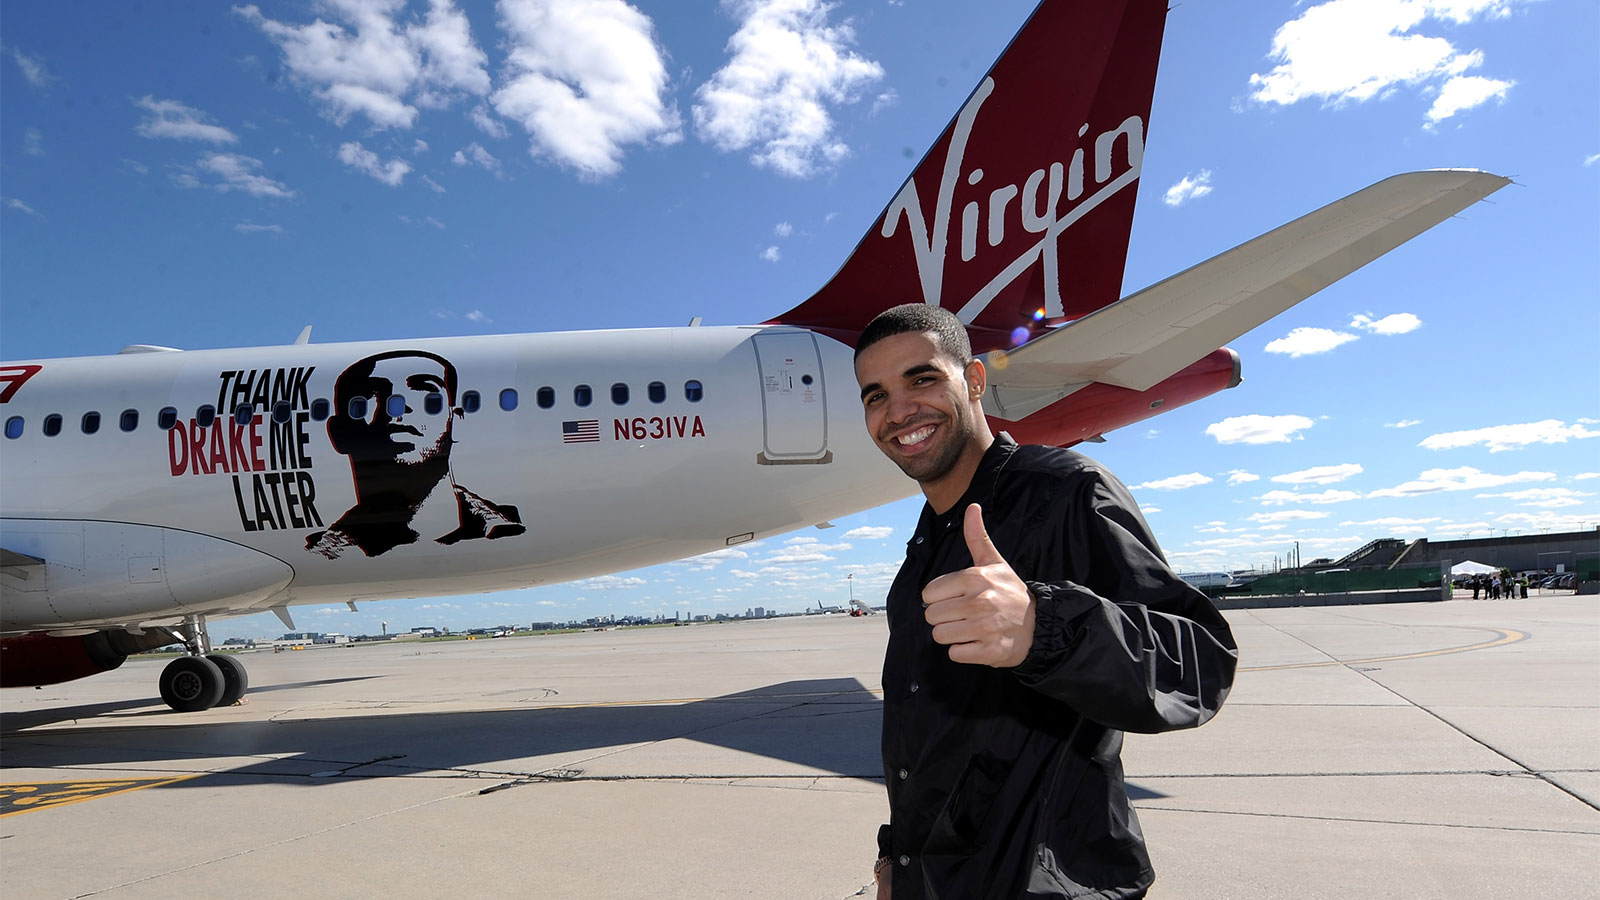 Musician Drake giving a thumbs up in front of a Virgin airlines plane with a decal of Drake's face and the words 